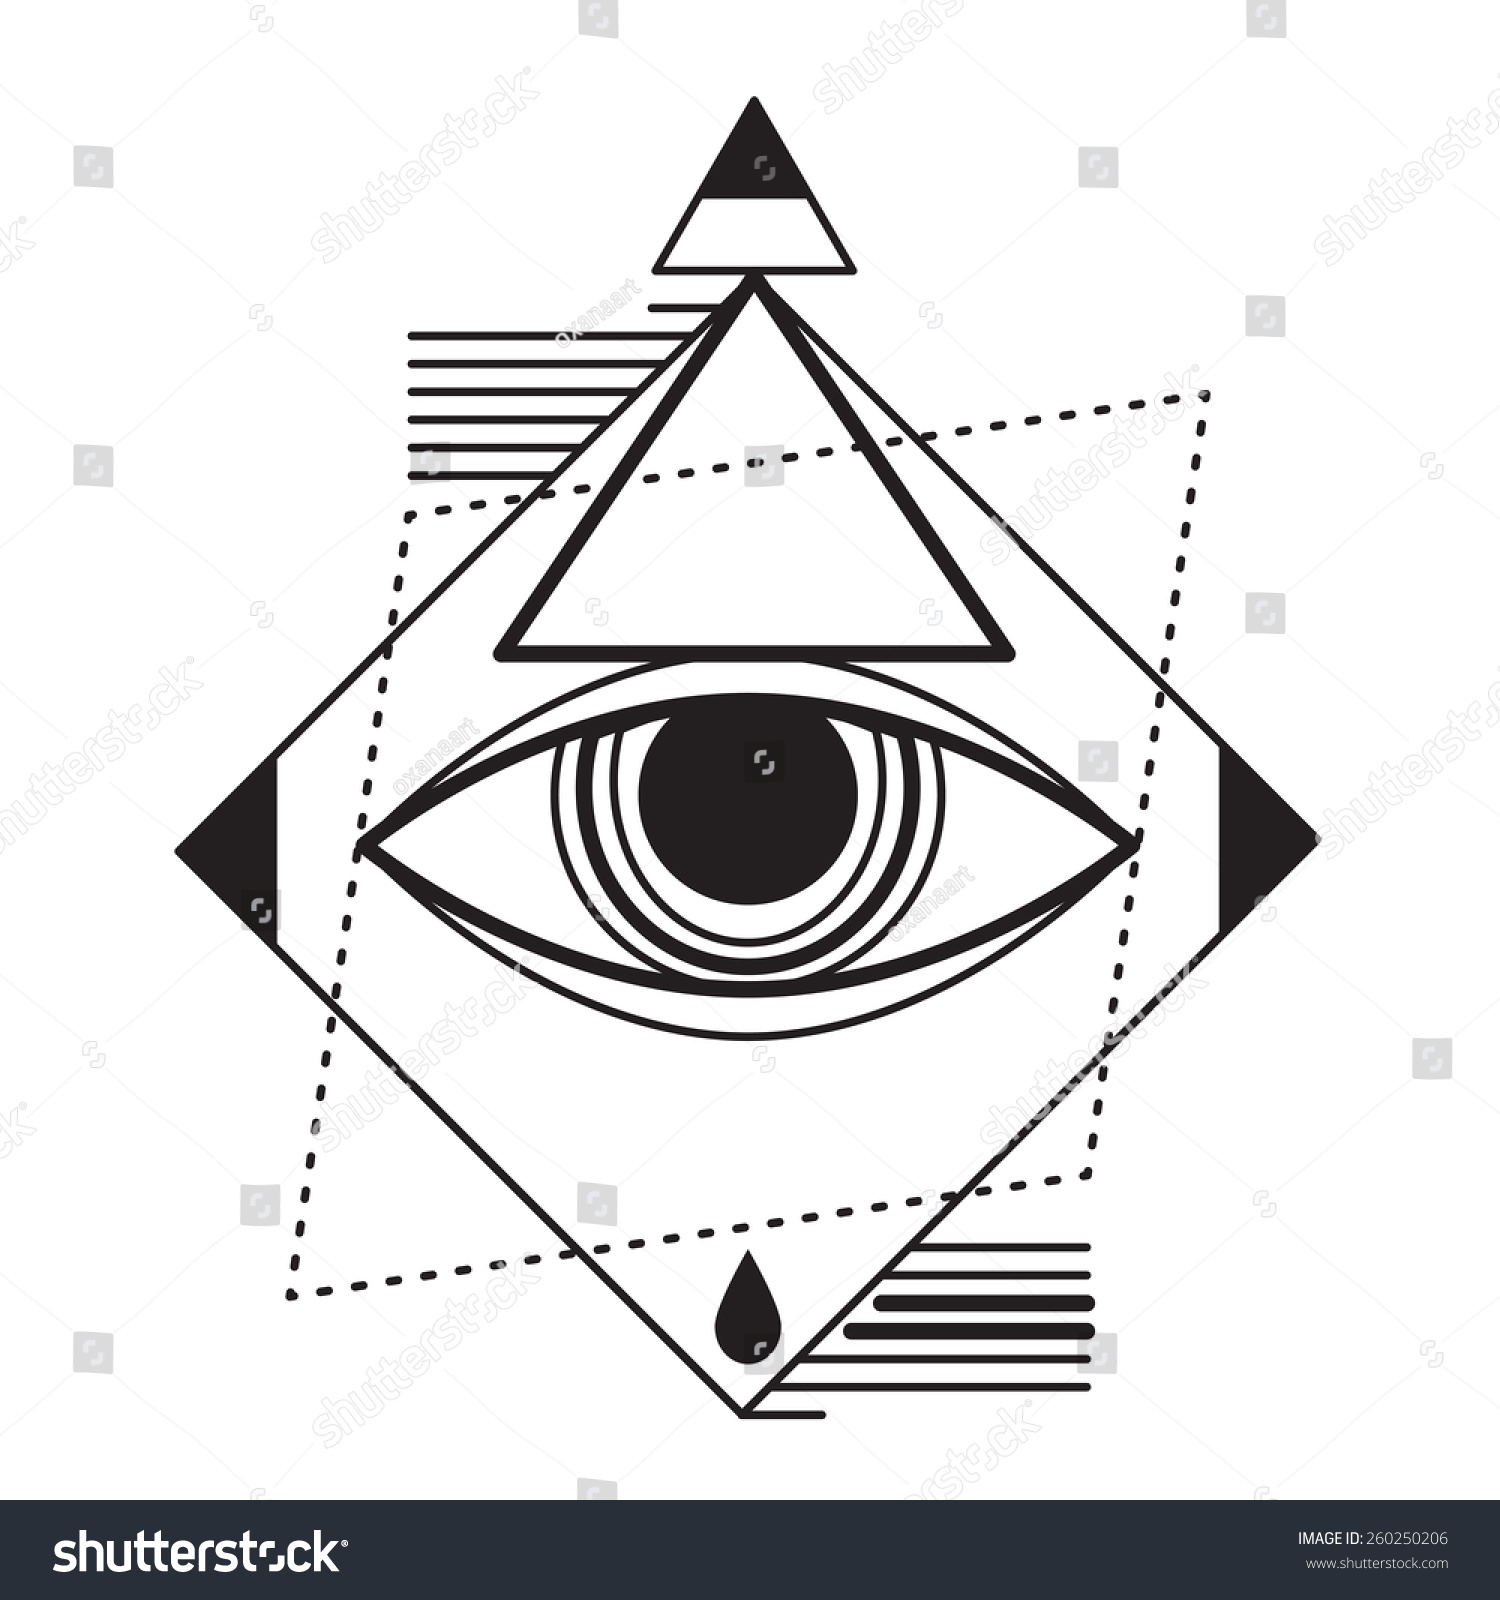 Stock Vector Trendy Style Geometric Tattoo Design Hipster Trend Symbolic Meaning With Eye And Triangle Geometric Tattoo Design Geometric Tattoo Tattoo Designs